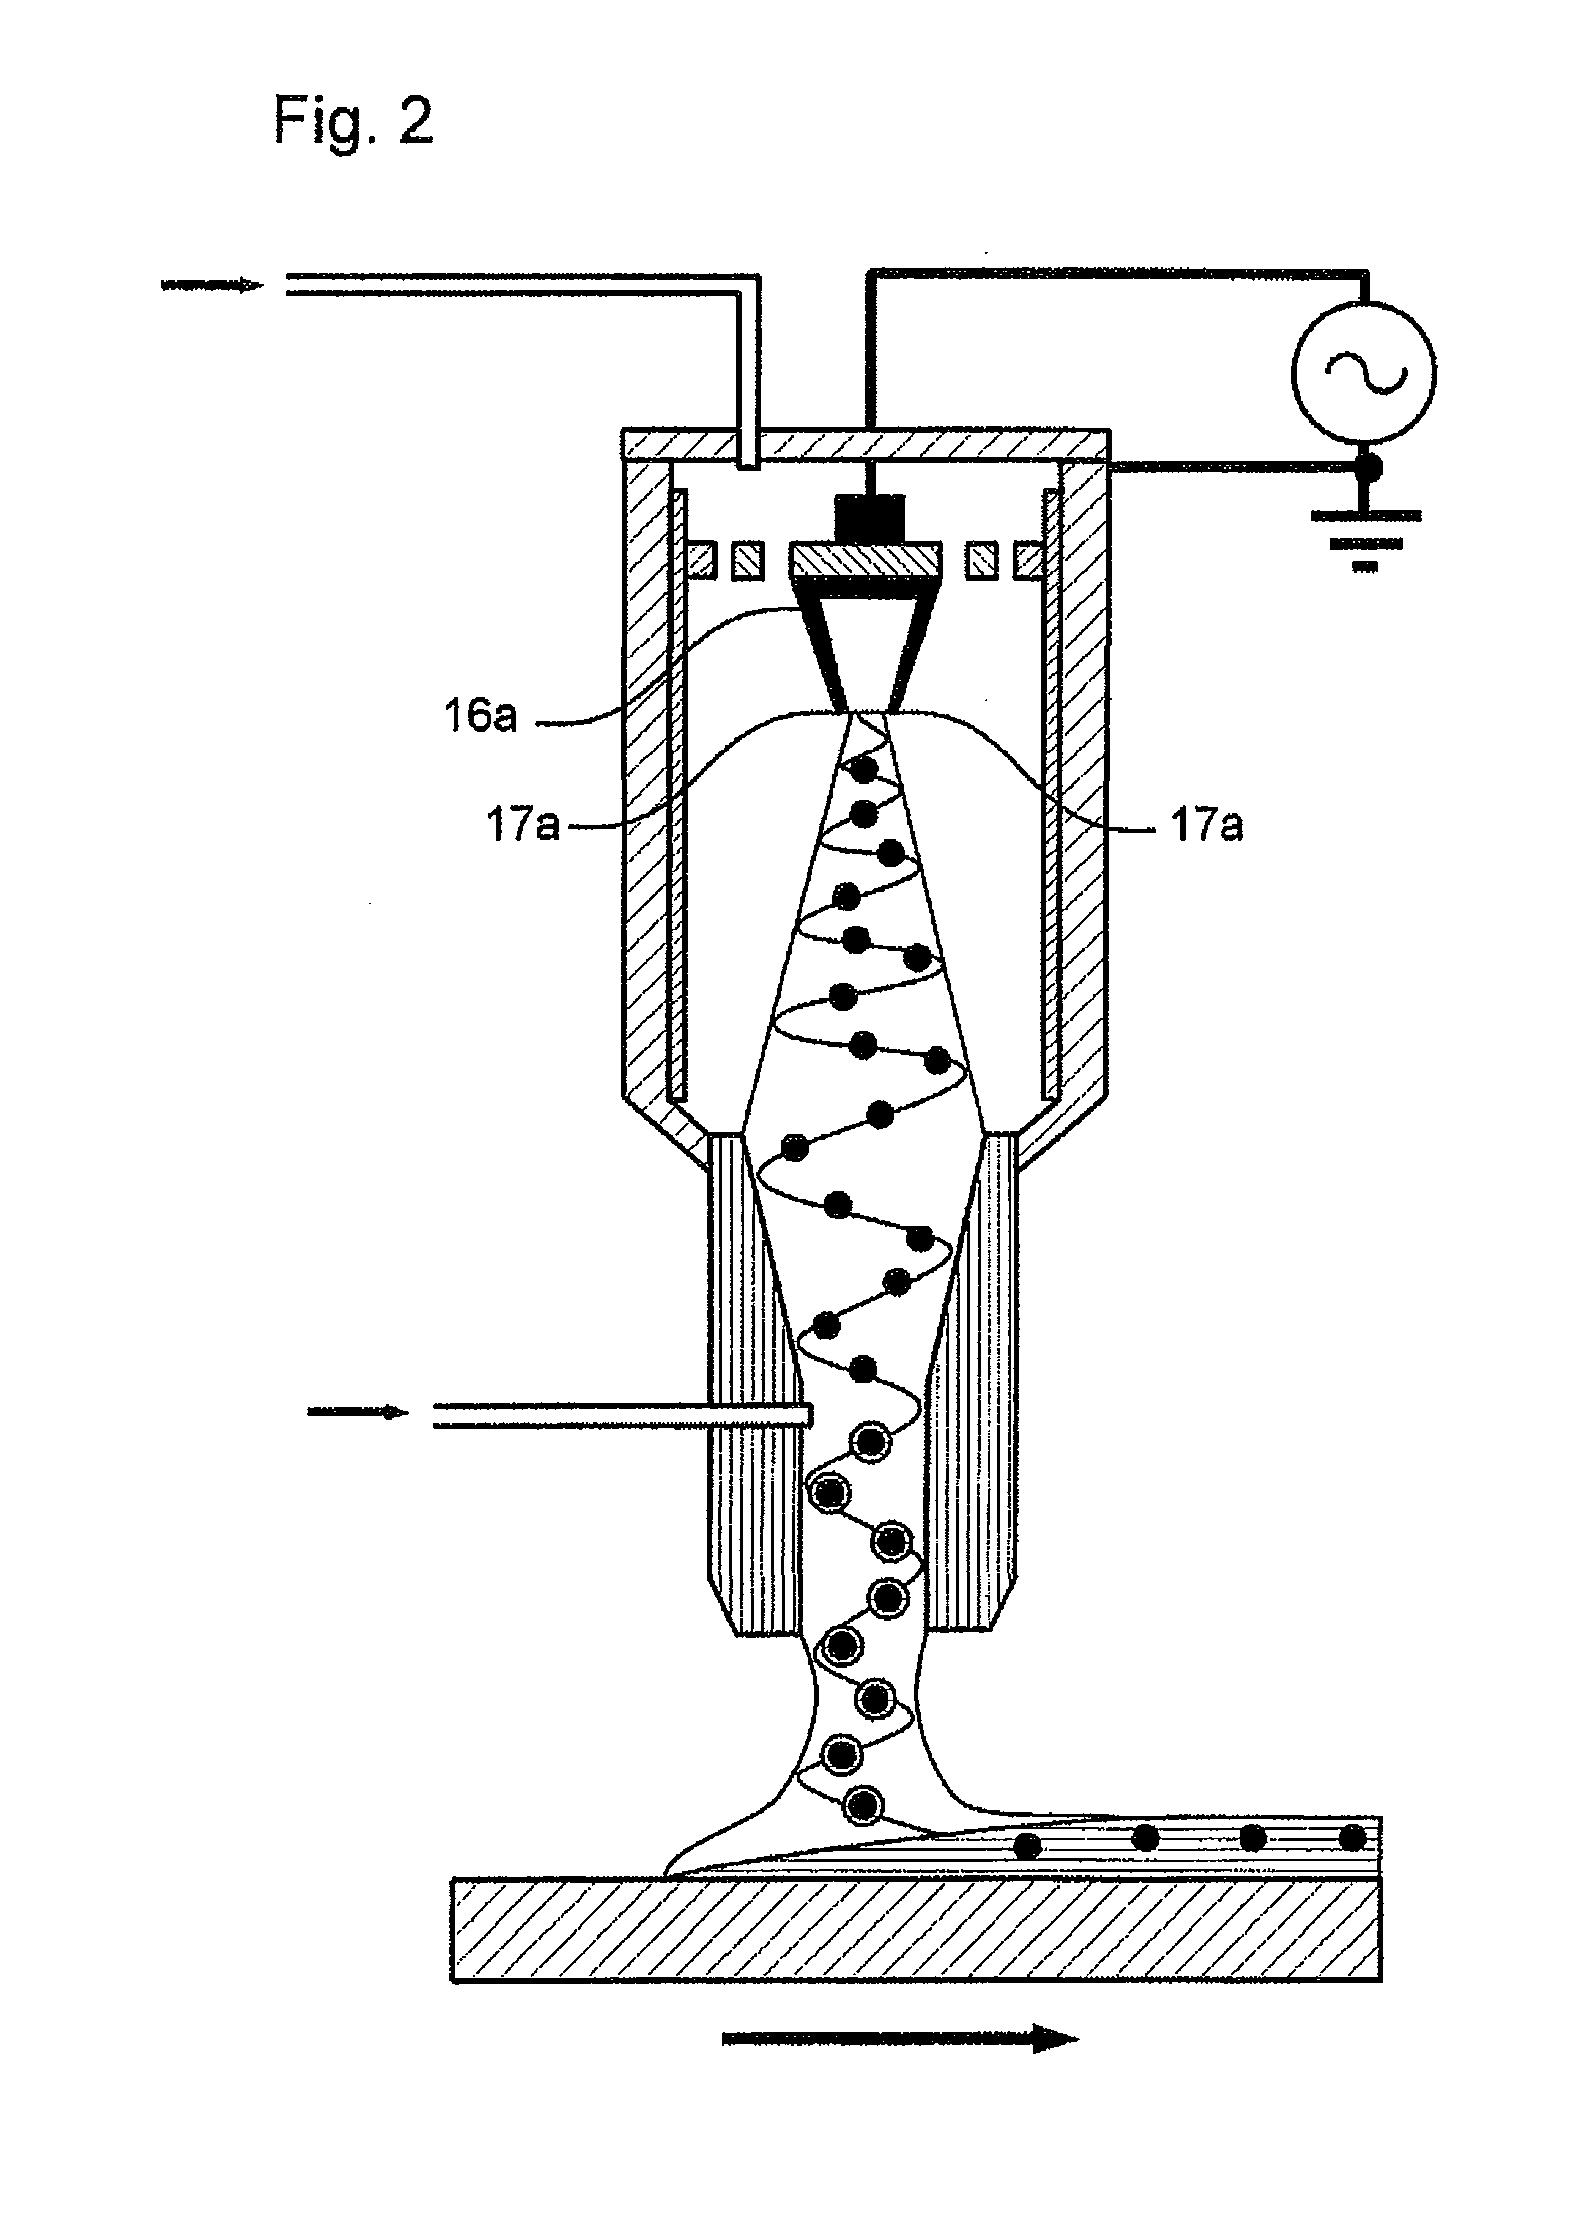 Atmospheric pressure plasma method for producing surface-modified particles and coatings